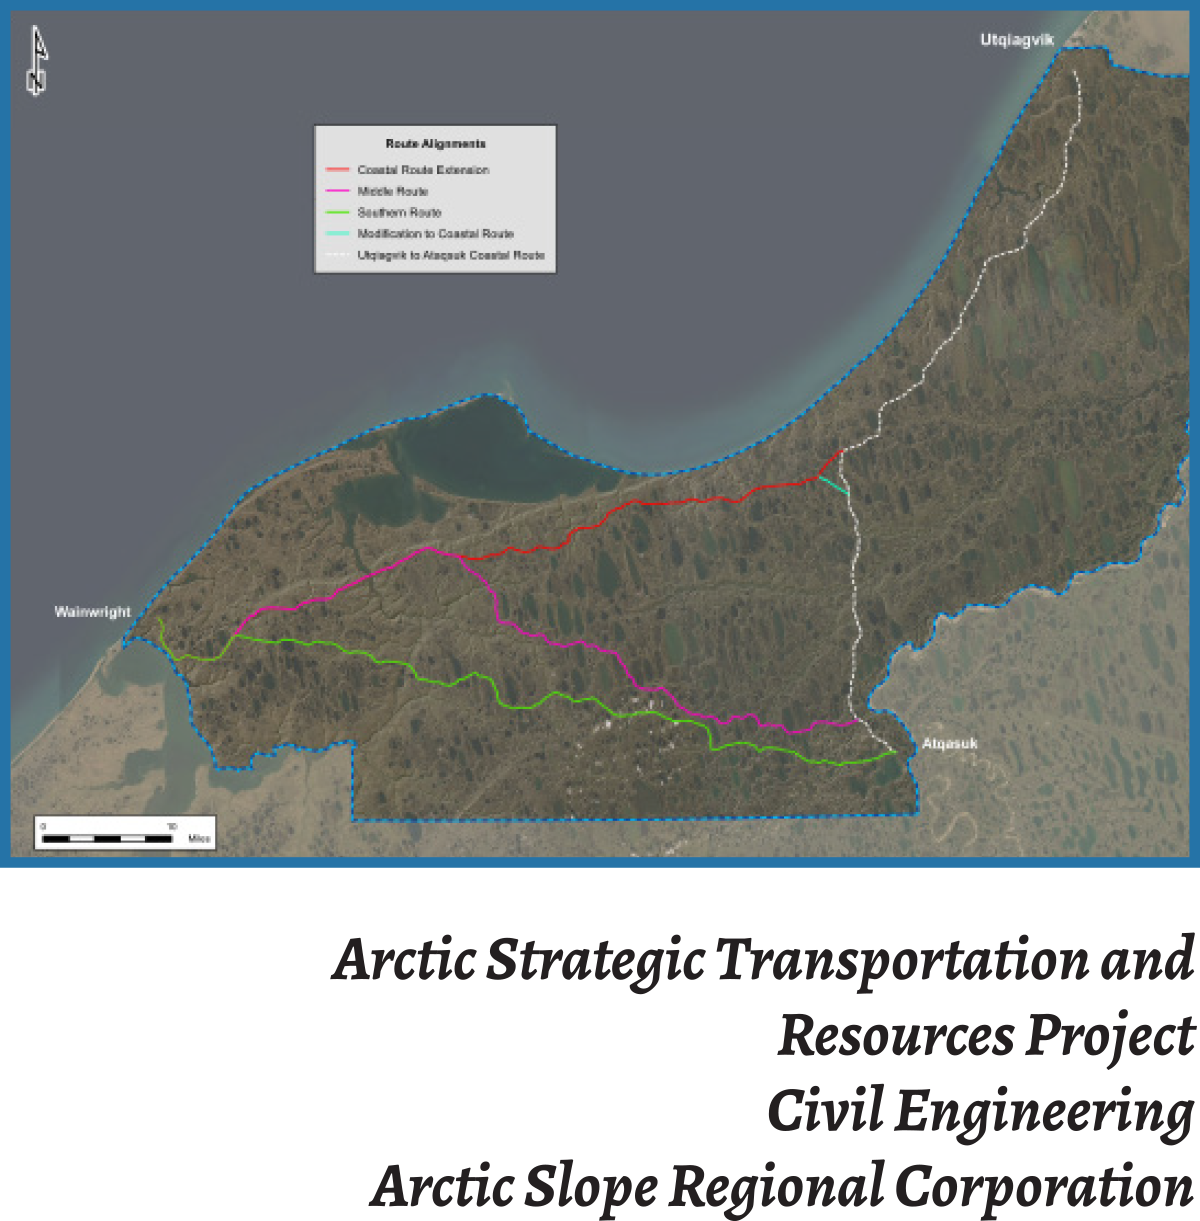 Arctic Strategic Transportation and Resources Project